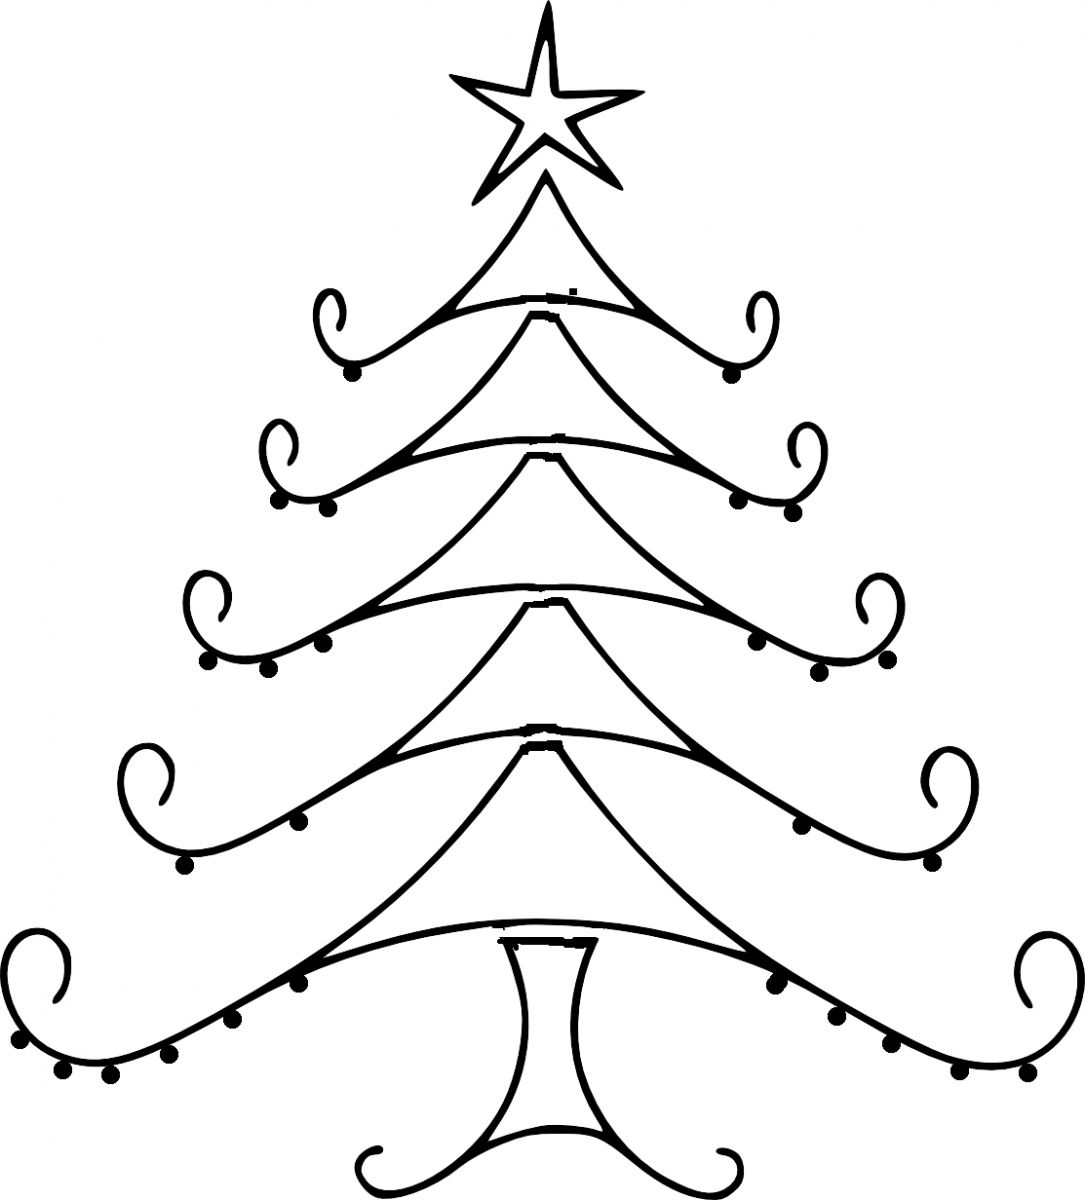 Christmas Tree Drawing - ClipArt Best